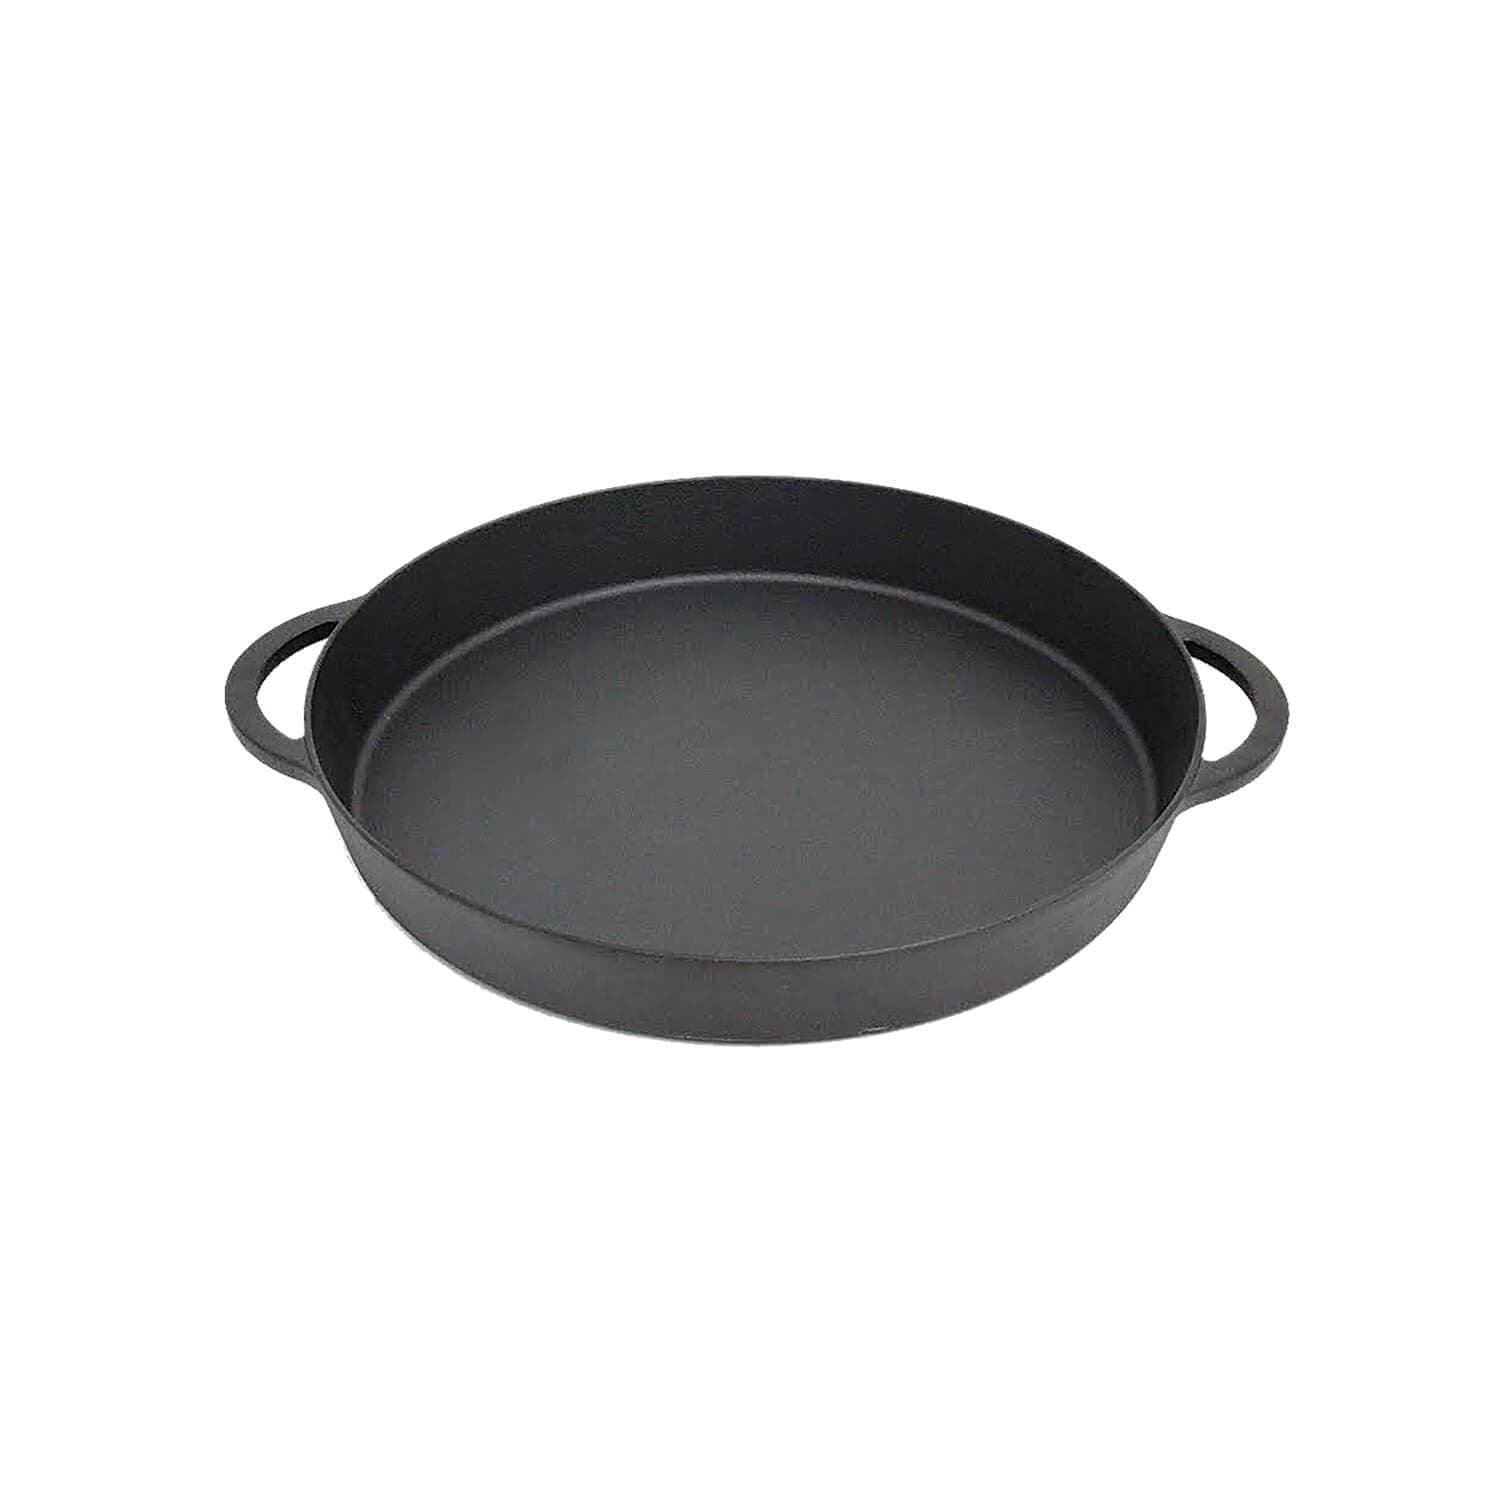 https://cdn.shopify.com/s/files/1/0254/3724/1407/products/big-green-egg-barbeque-cast-iron-skillet-14-wicker-land-patio-15367854129215_1600x.jpg?v=1604428422